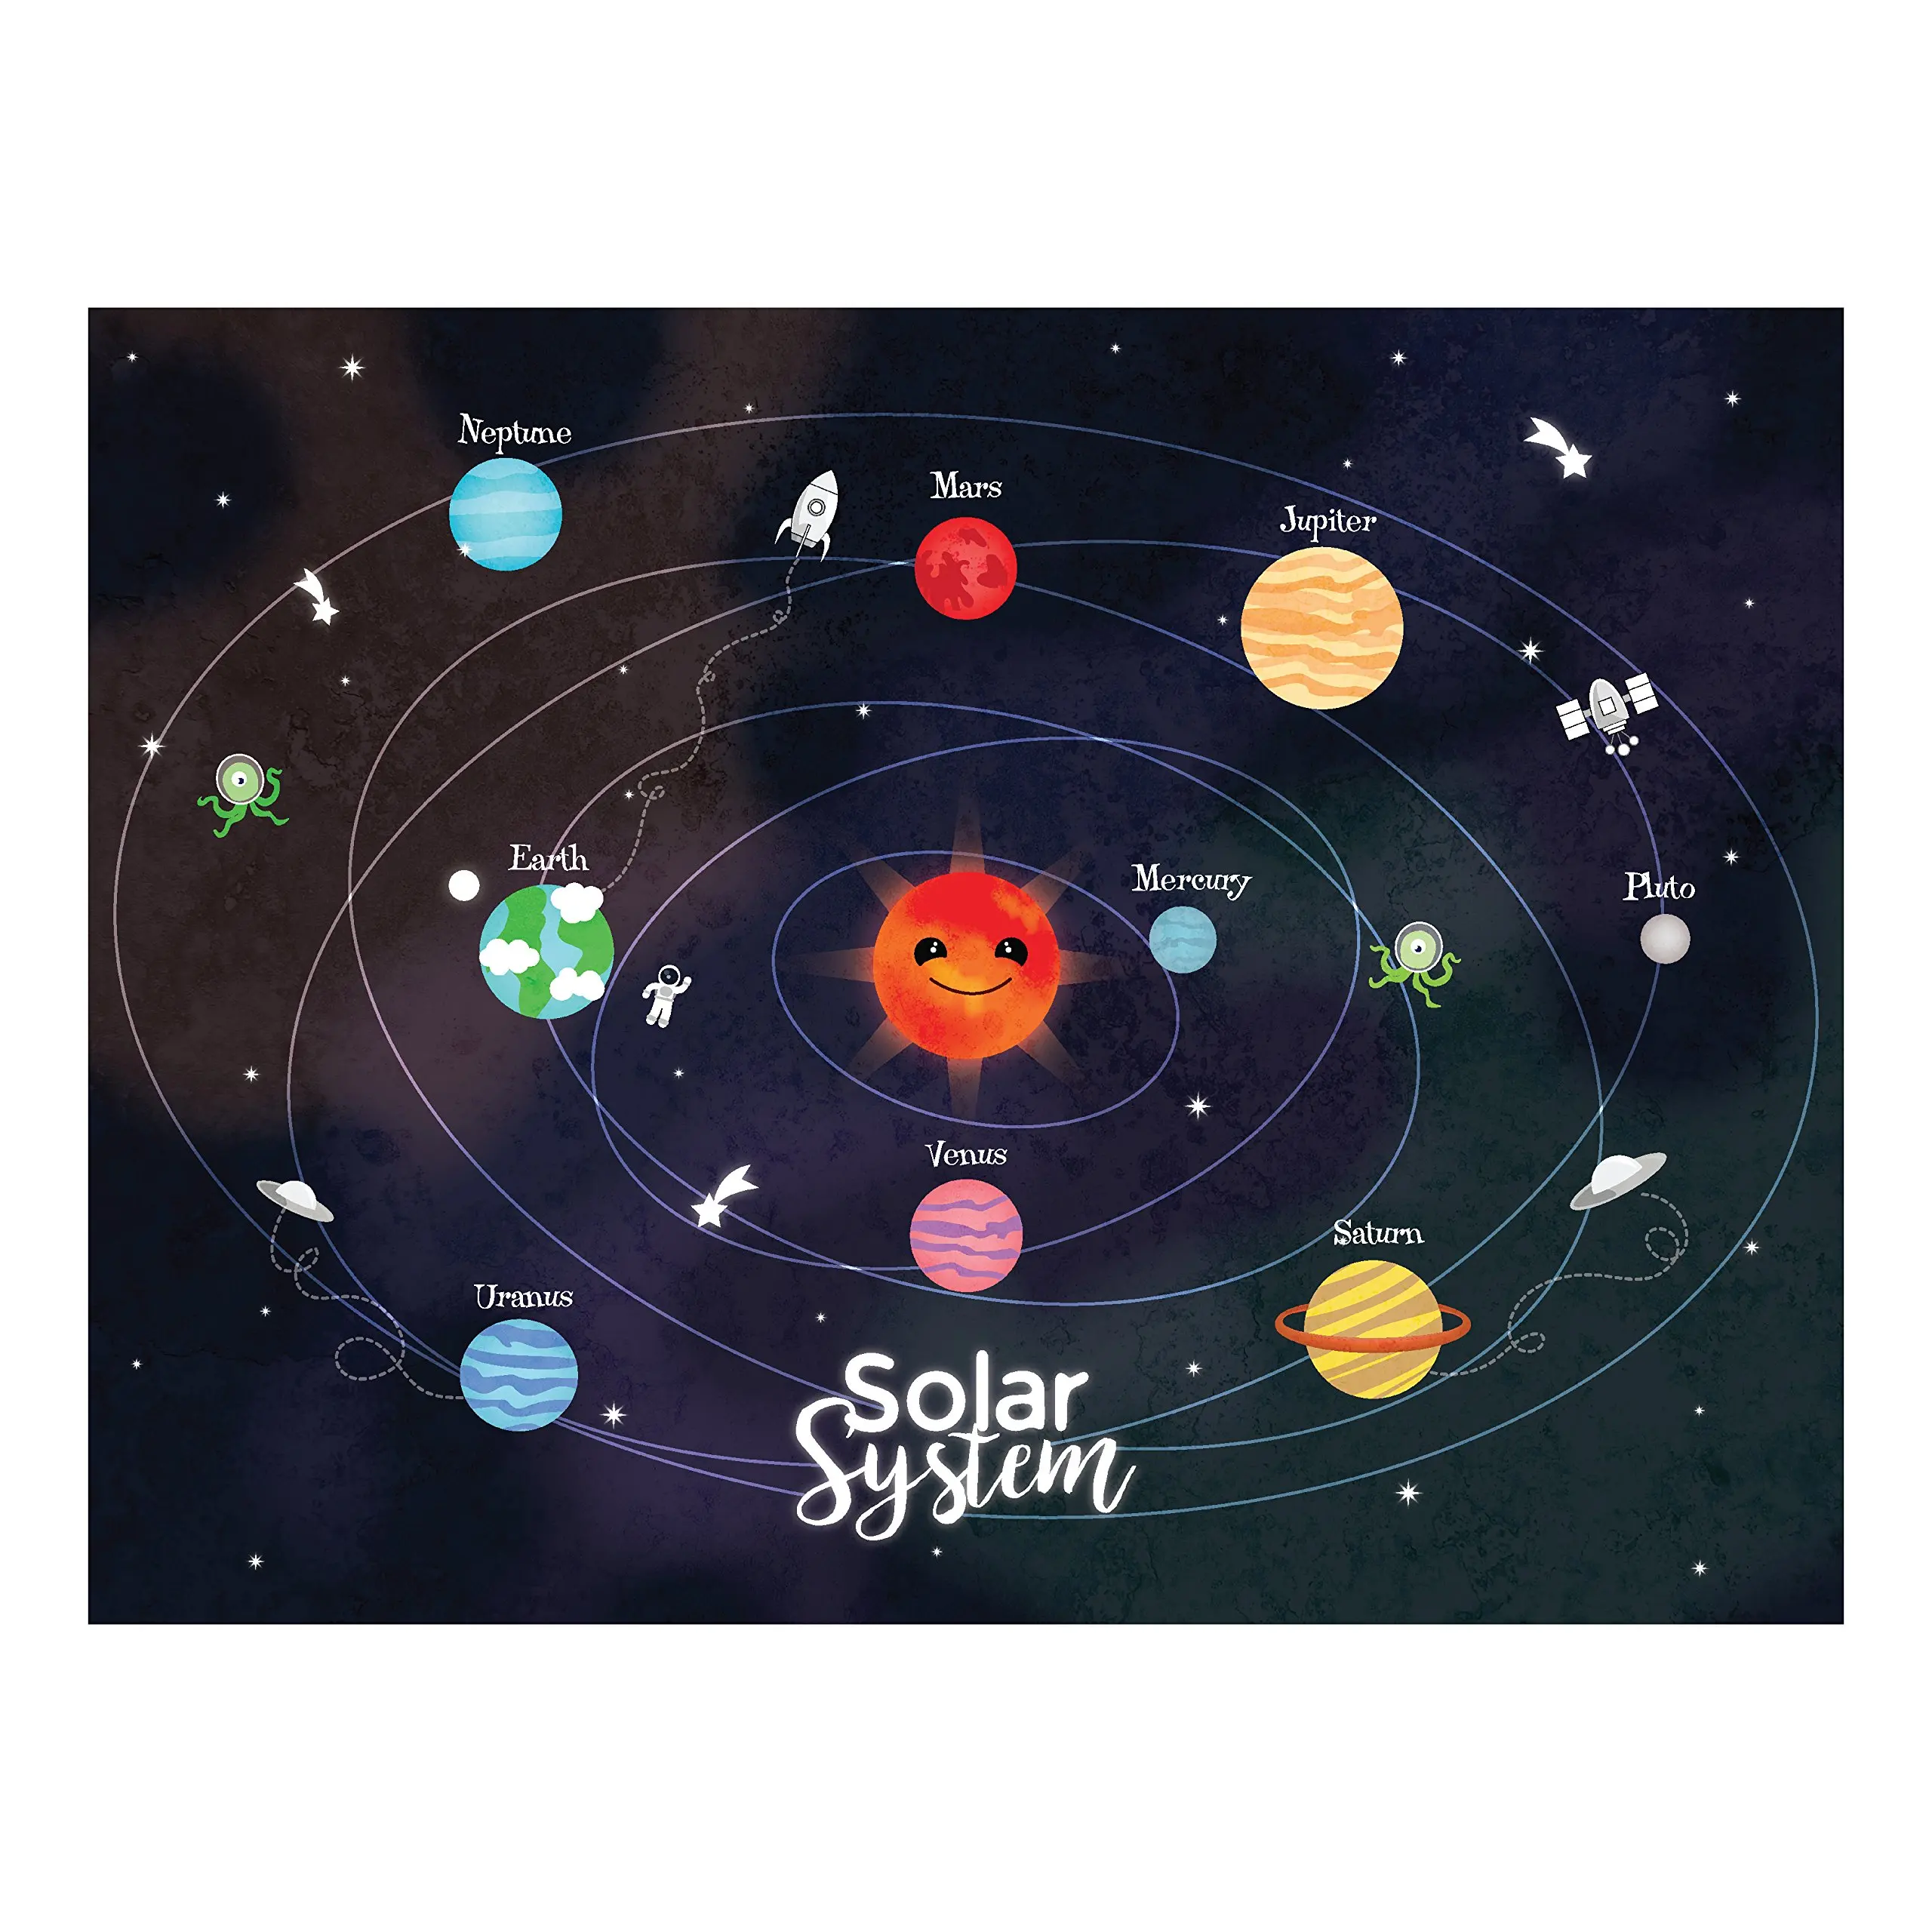 Solar System Montage of Planets from Voyager Images New 5x7 Photo